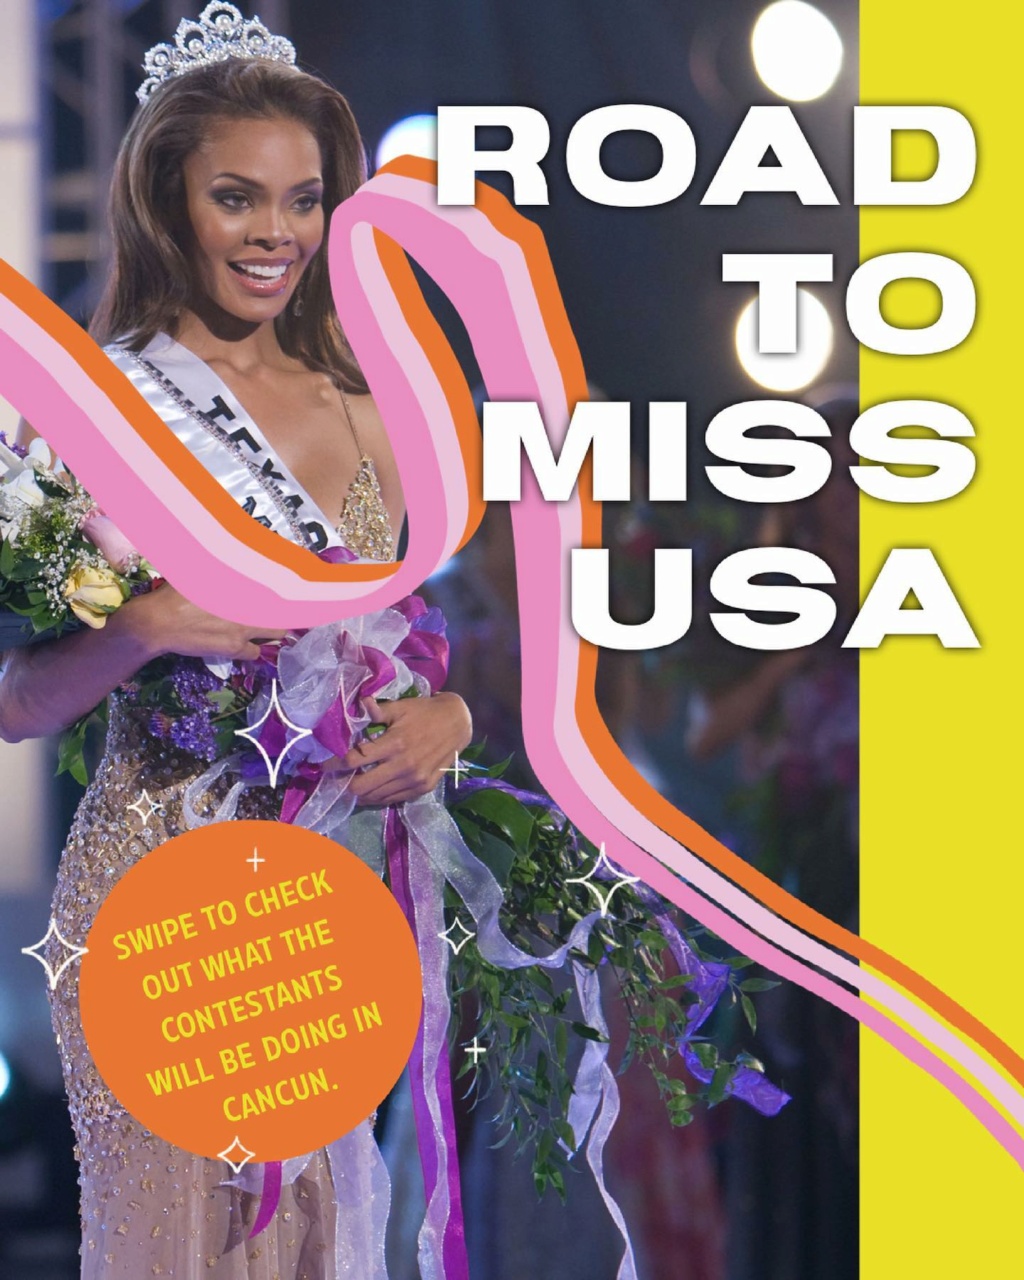 ROAD TO MISS USA 2021 is KENTUCKY! 1455